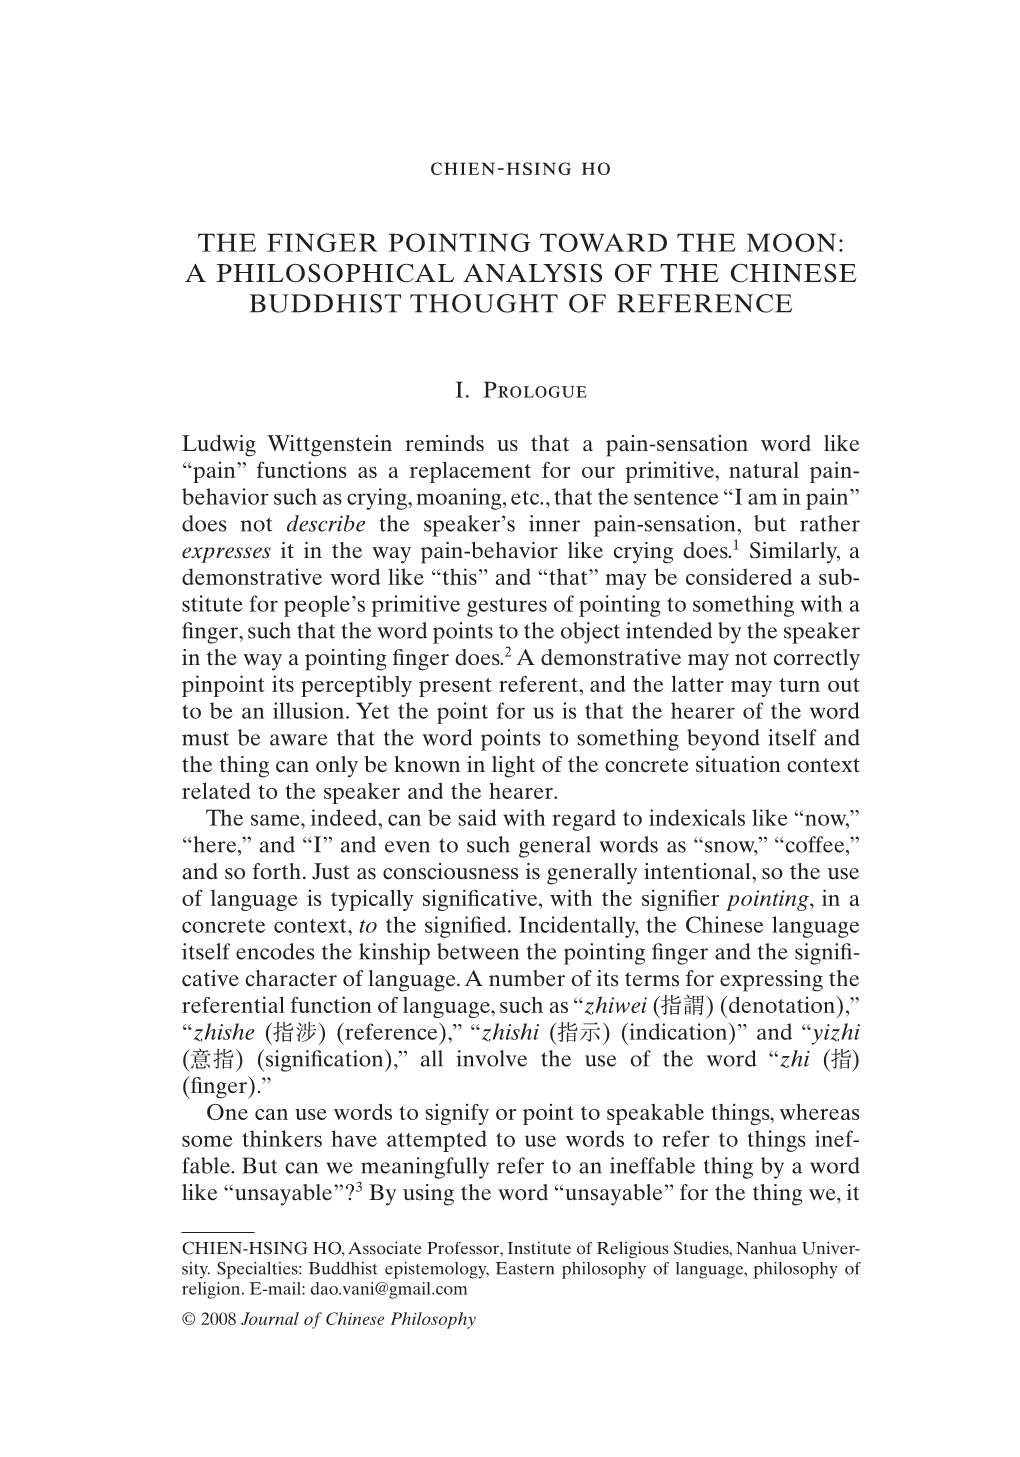 The Finger Pointing Toward the Moon: a Philosophical Analysis of the Chinese Buddhist Thought of Reference